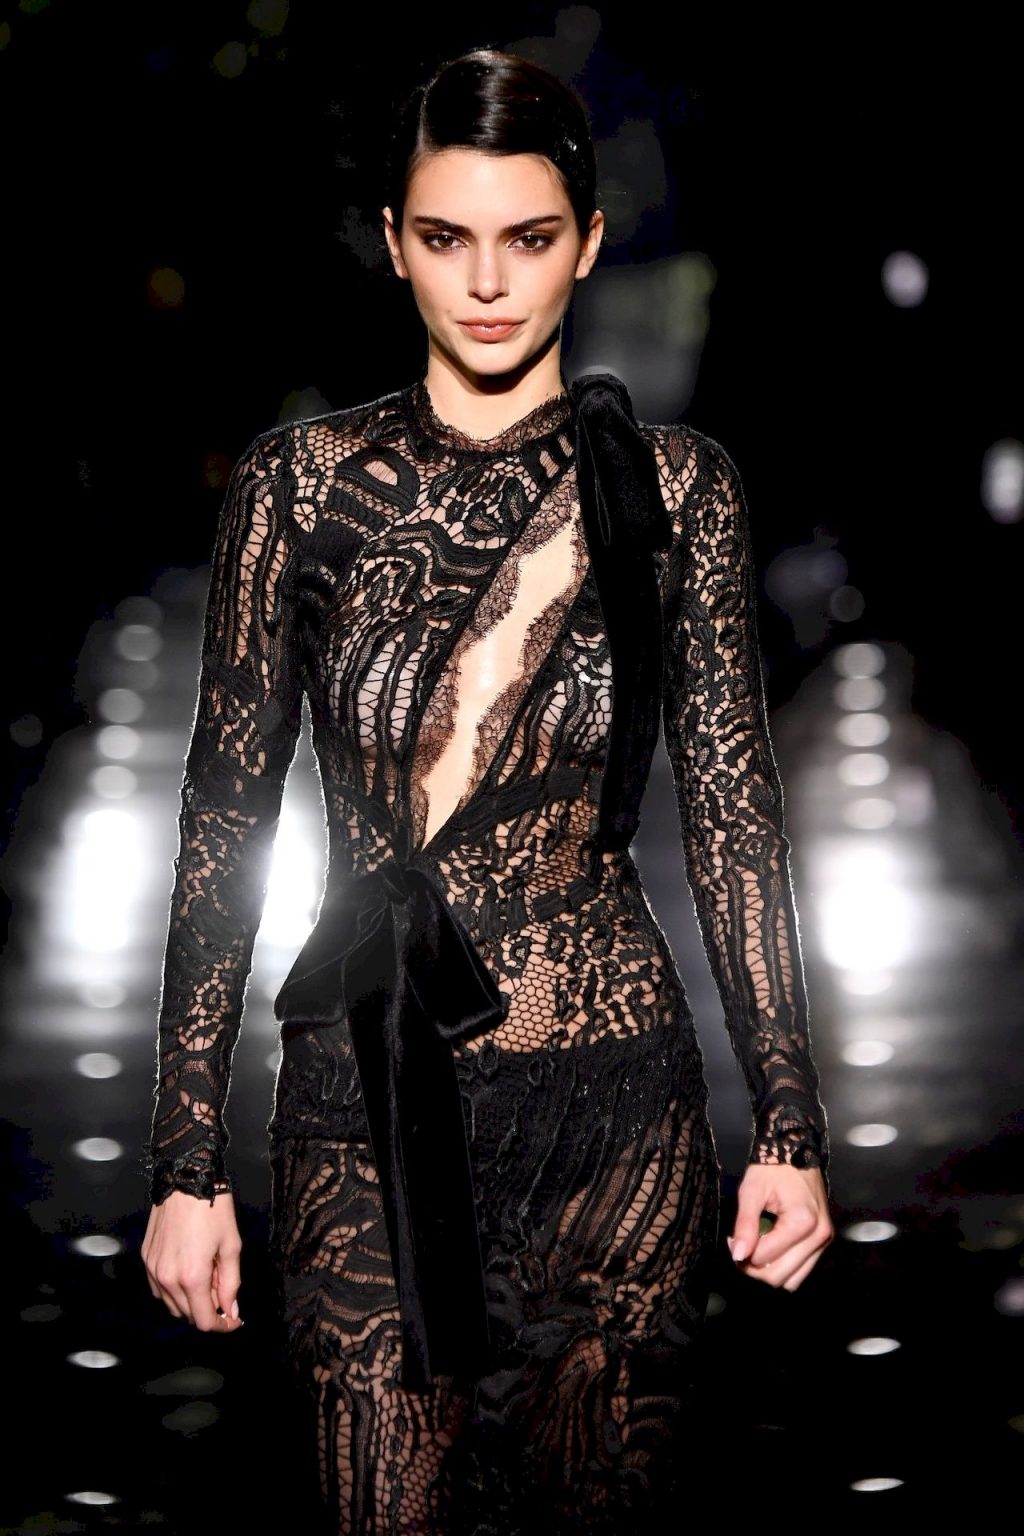 Kendall Jenner Walks the Runway During the Tom Ford Show (13 Photos + Video)